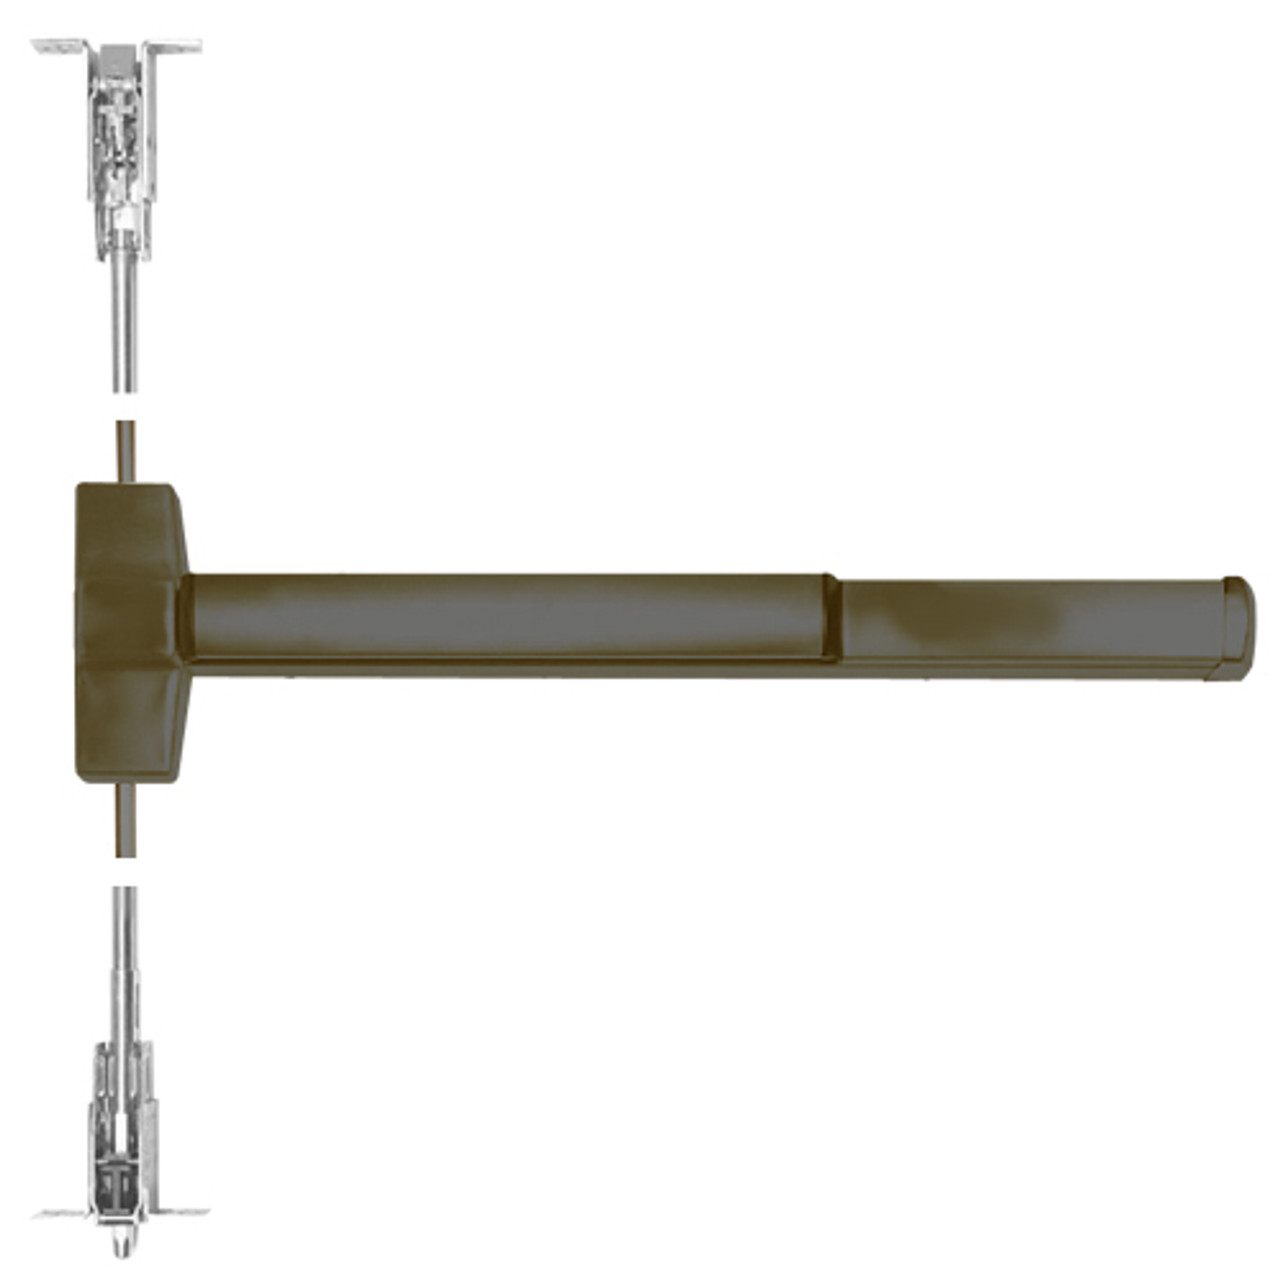 ED5860B-613-W048-MELR-M92 Corbin ED5800 Series Fire Rated Concealed Vertical Rod Device with Motor Latch Retraction and Touchbar Monitoring in Oil Rubbed Bronze Finish